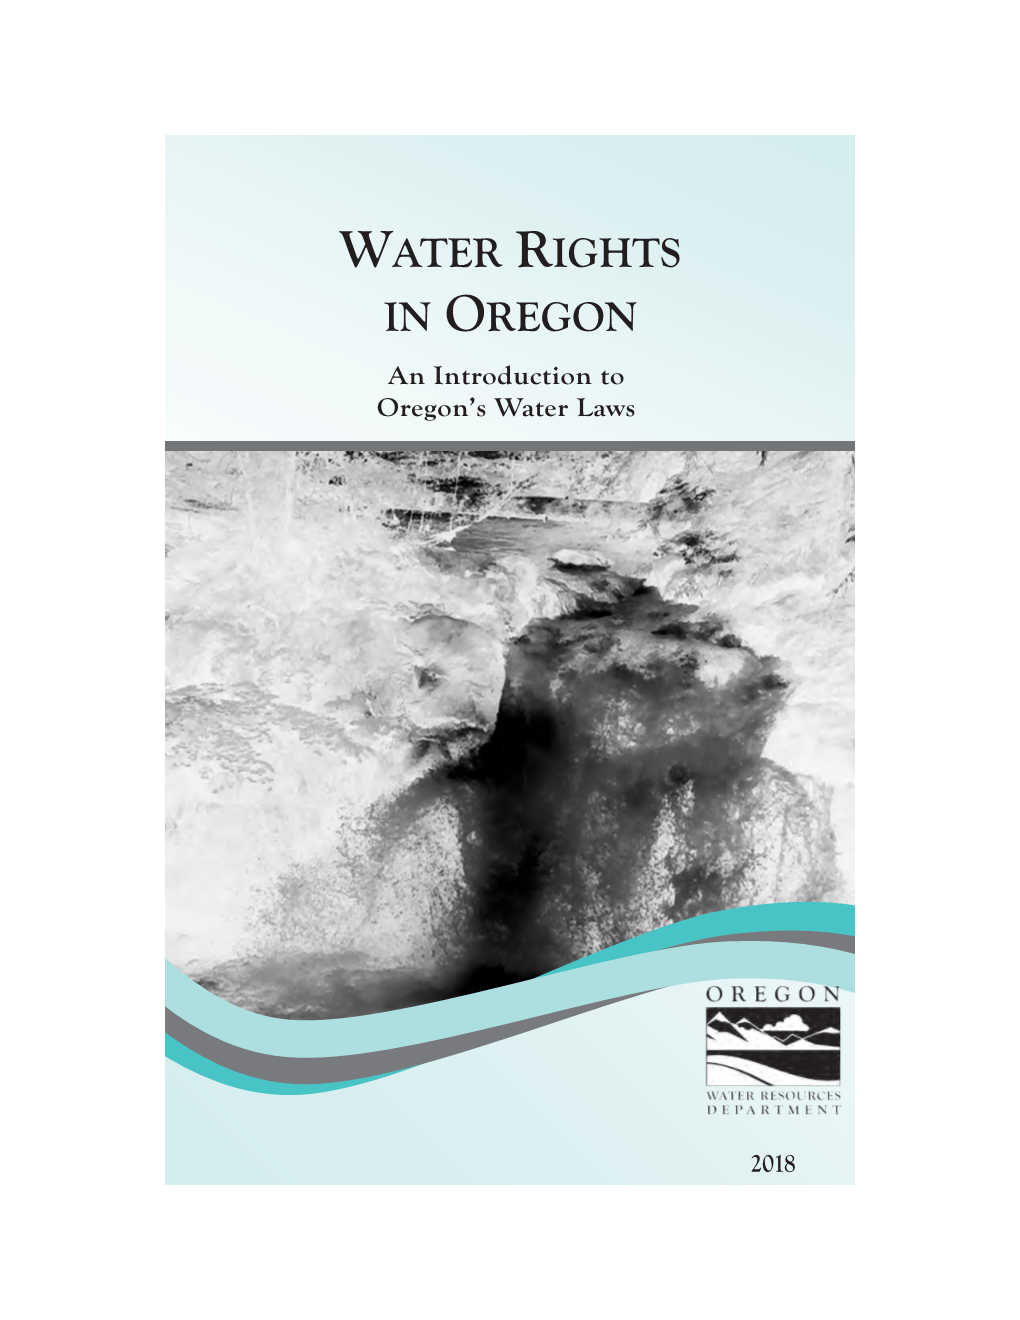 WATER RIGHTS in OREGON an Introduction to Oregon’S Water Laws